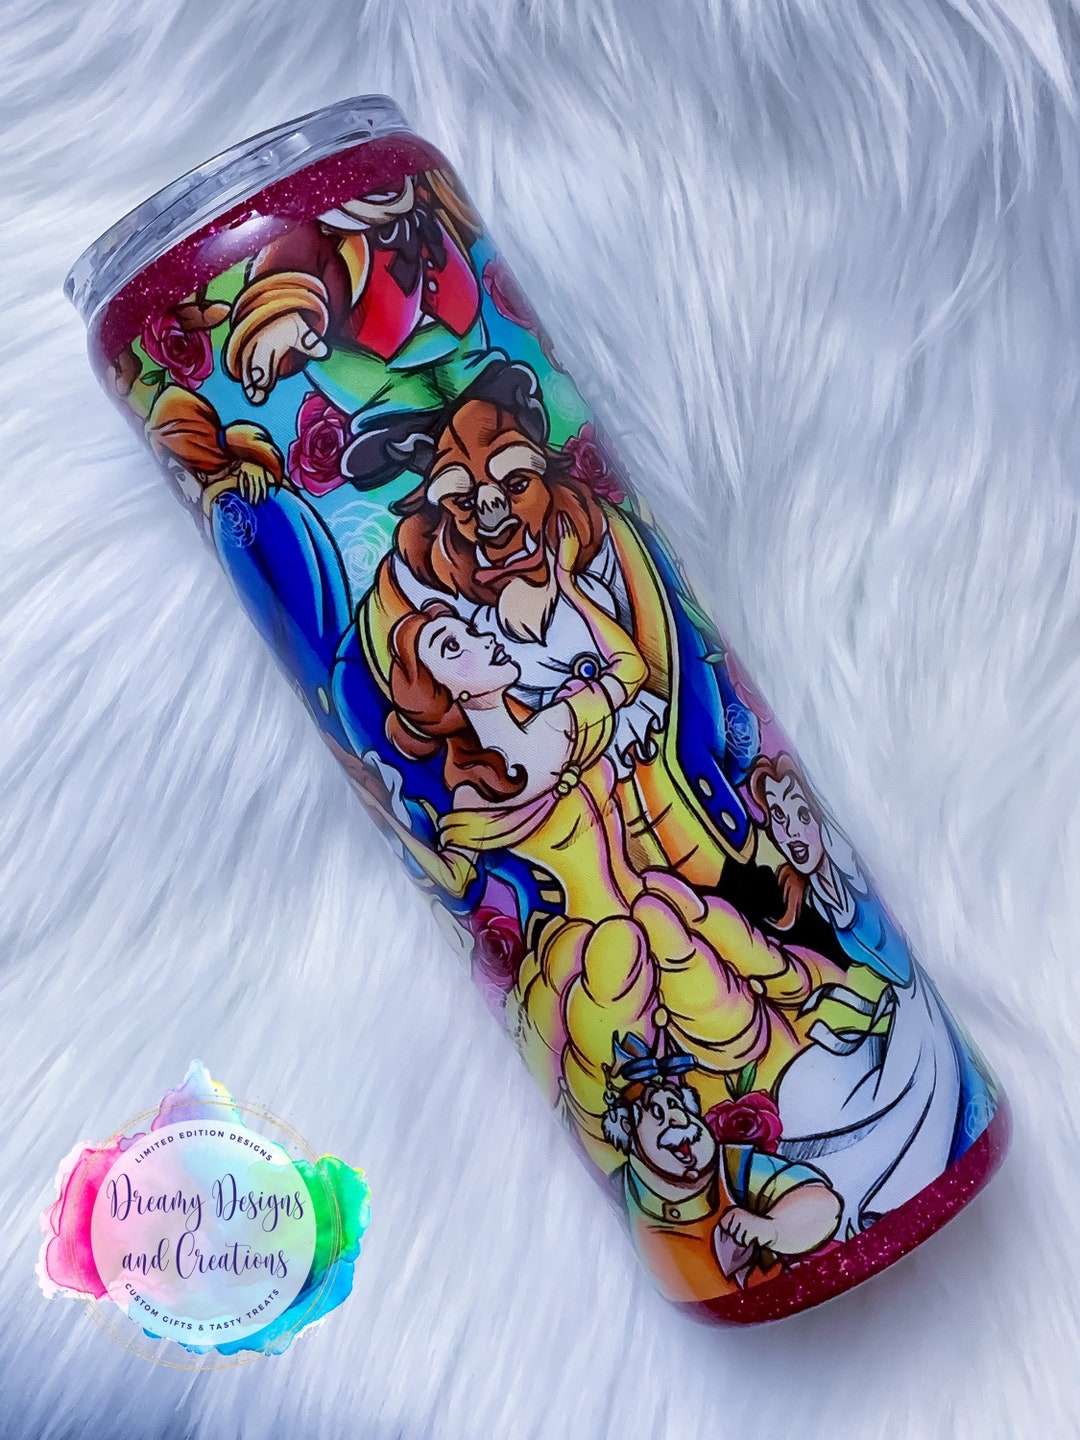 Beauty And Beast Tumbler Playful Gift - Personalized Gifts: Family, Sports,  Occasions, Trending